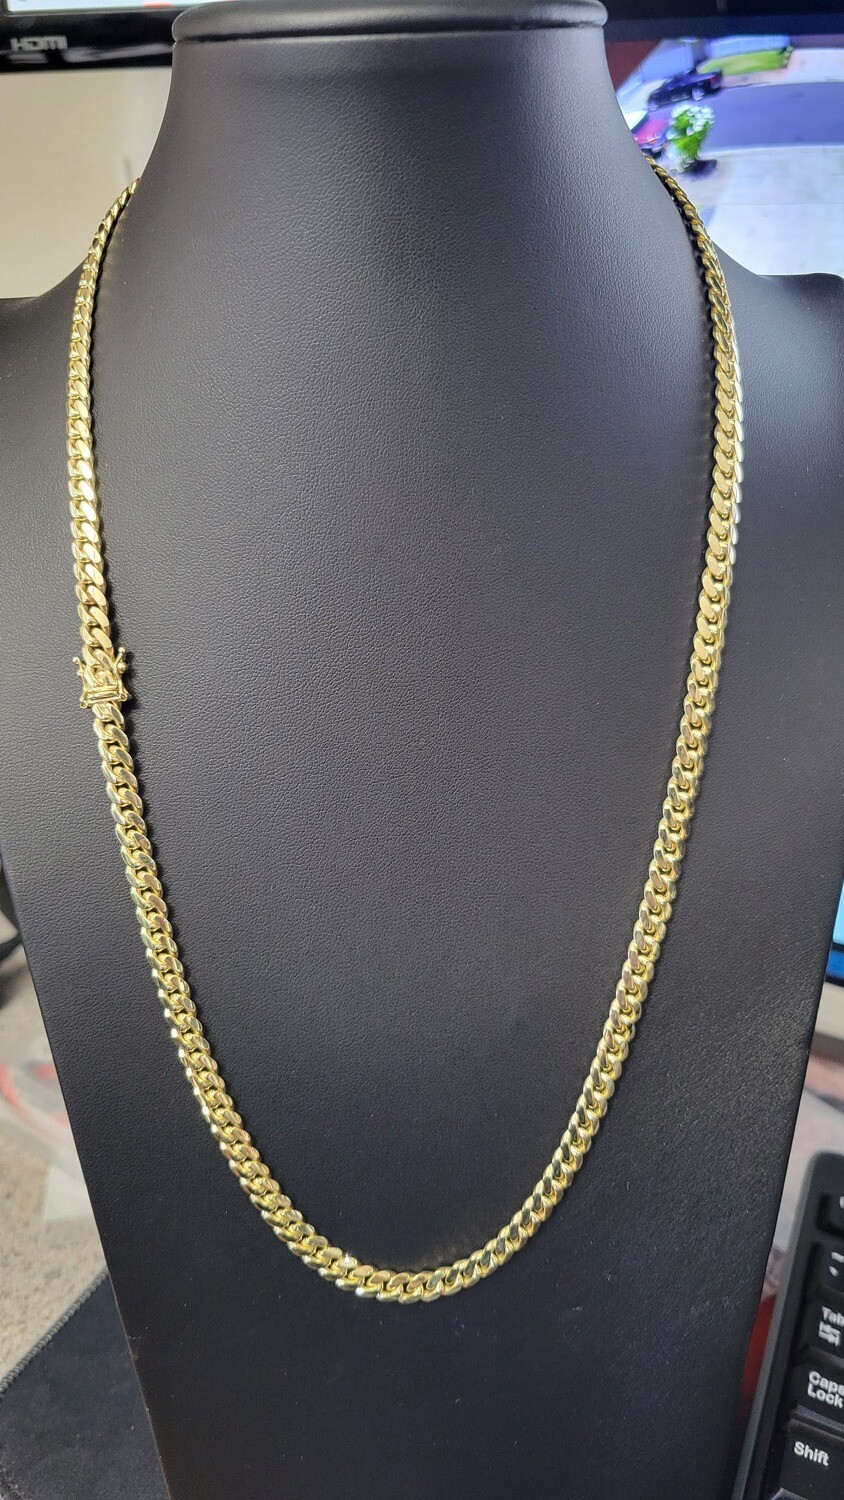 14K 6MM MIAMI CUBAN CHAIN, PREORDERS TAKE 1 WEEK TO SHIP-PRICE ADJUSTED ACCORDING TO ACTUAL WEIGHT: 14K 6MM 18&quot; MIAMI CUBAN 50.1 GRAMS